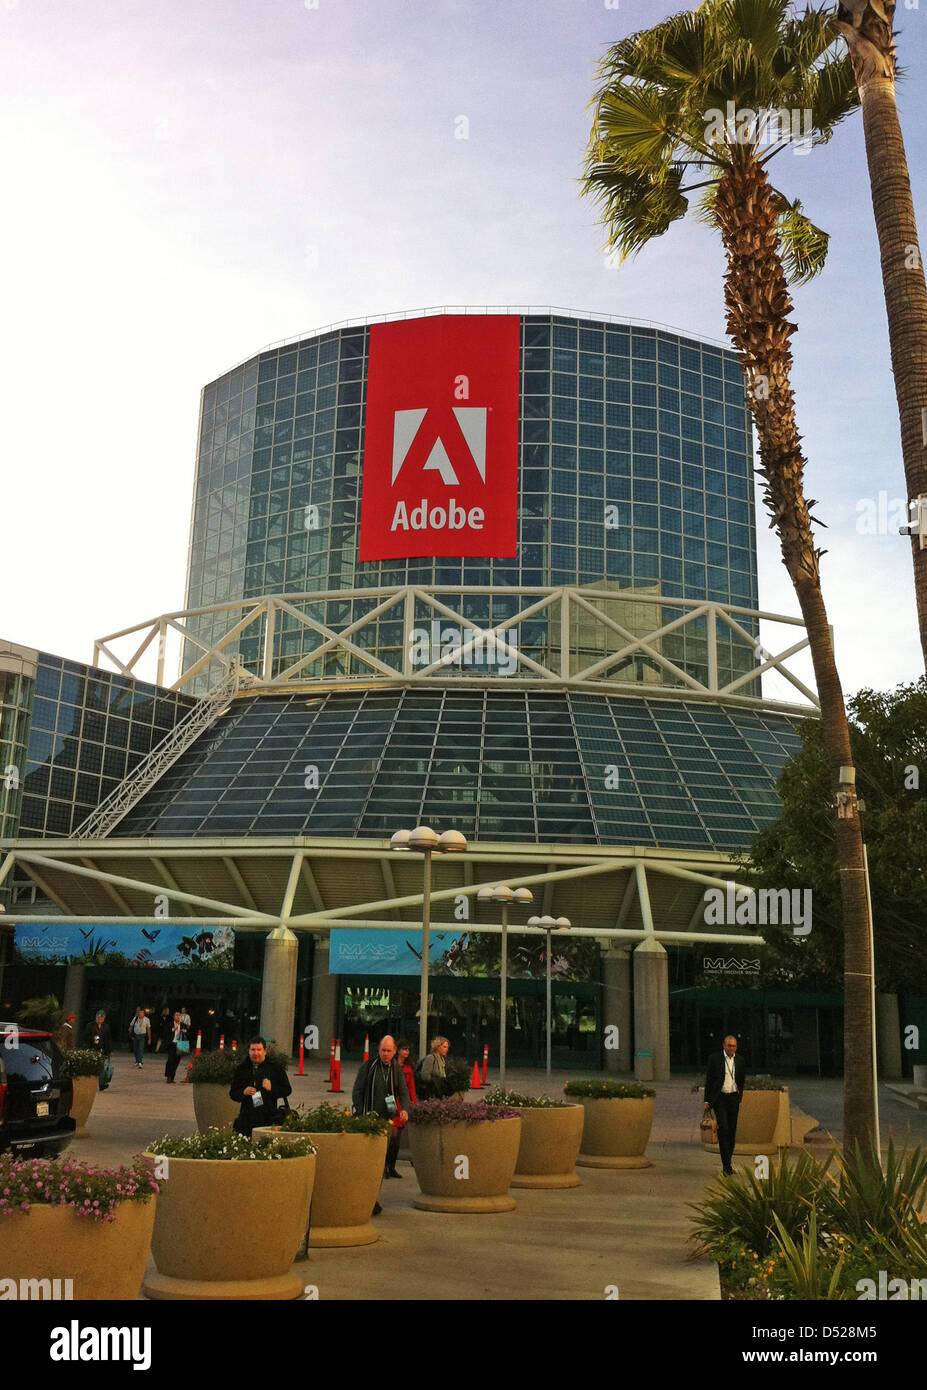 Exterior view on the Convention Center, where the Adobe developer conference is held in Los Angeles, CA, USA, 25 October 2010. After a row carried out with Apple, software giant Adobe takes a step ahead with new products and new allies. Adobe presented several solutions to translate multimedia content in a standardise format from mobile devices to television, including the 'Digital Stock Photo